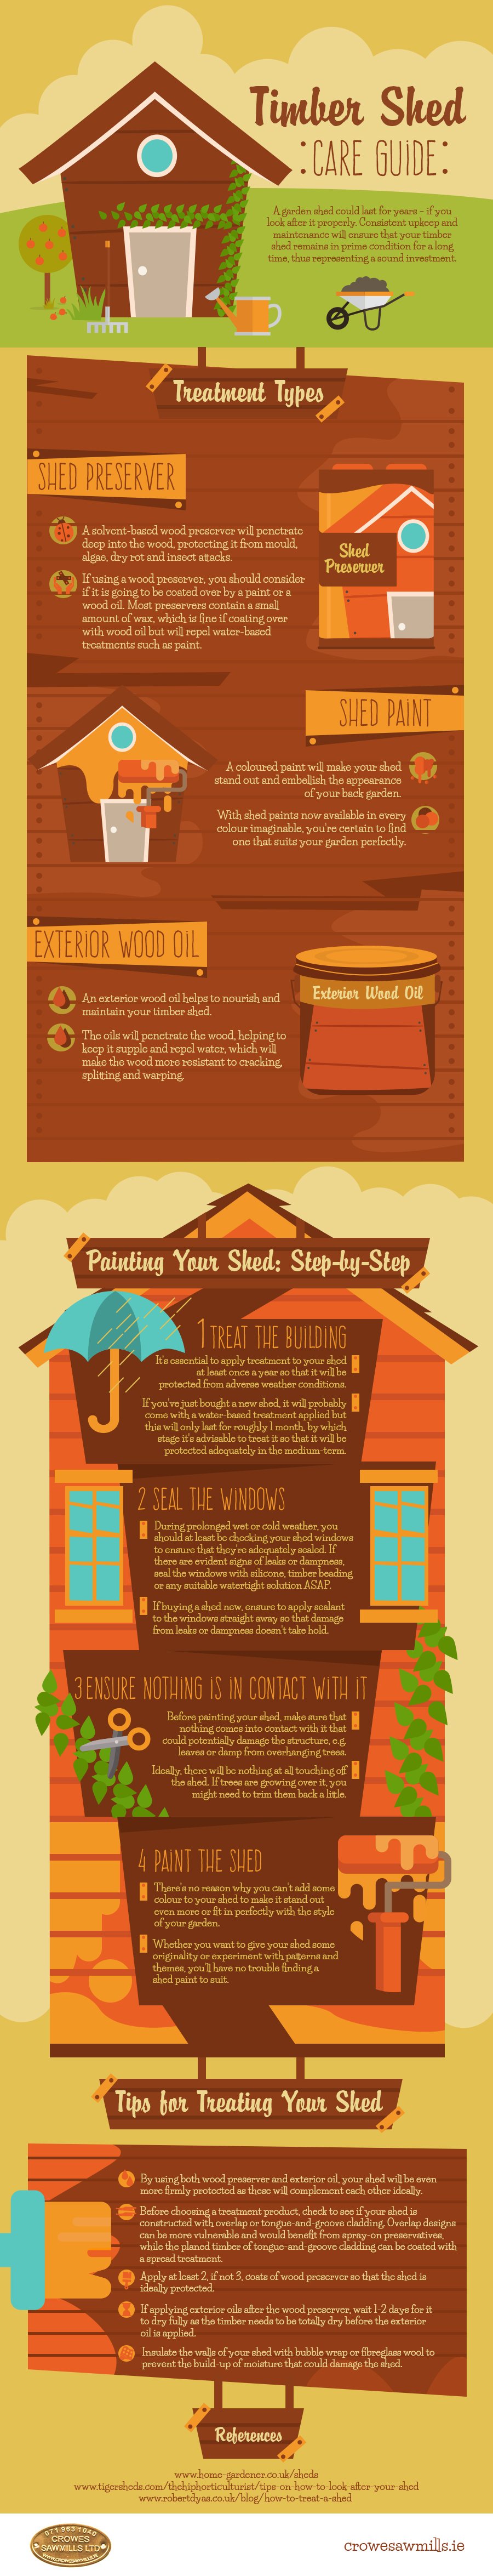 timber-shed-care-guide